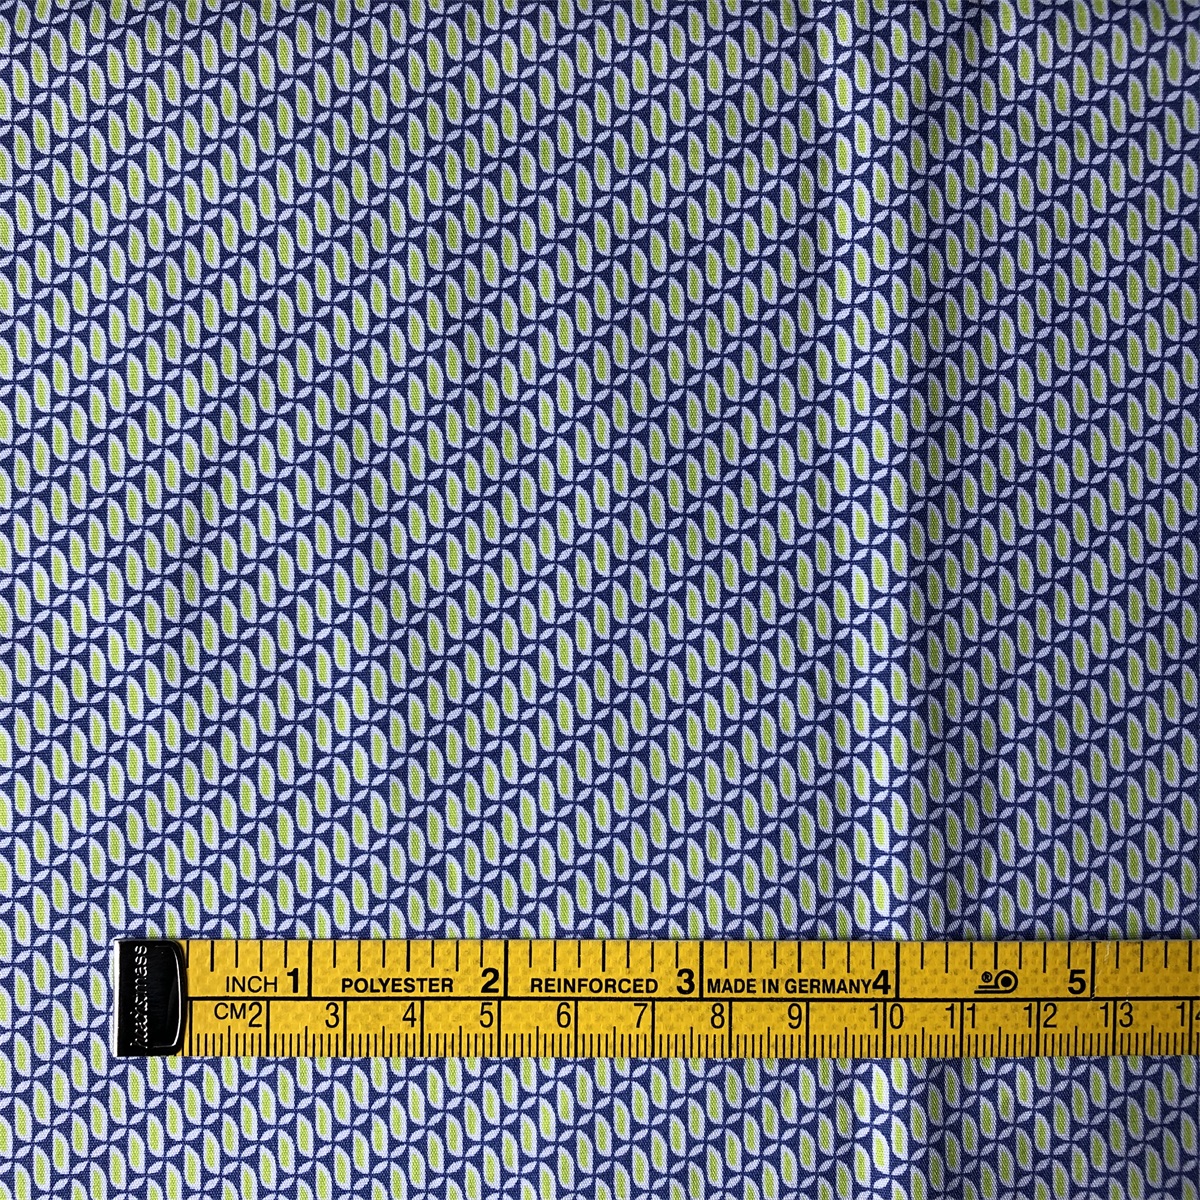 Sun-rising Textile Cotton fabric hot sale high quality soft 100%cotton poplin printed fabric for men's shirts